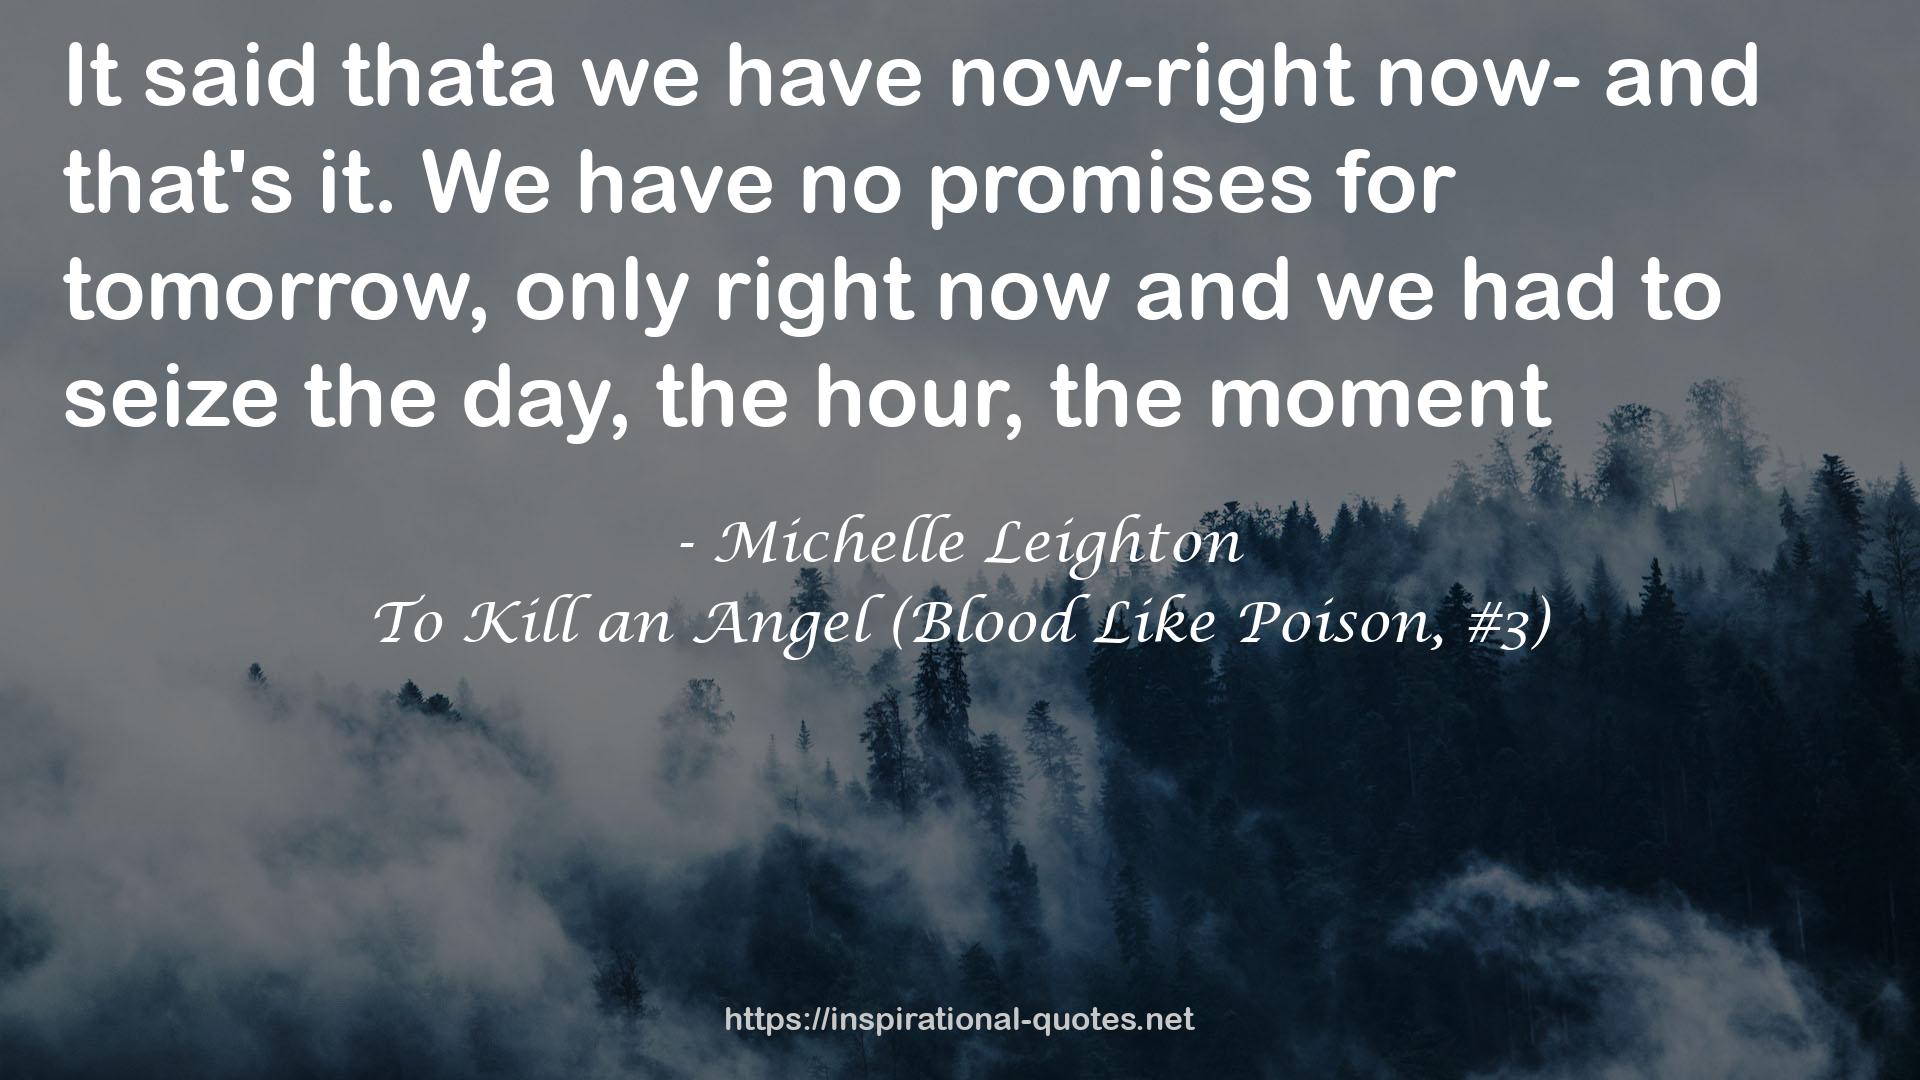 To Kill an Angel (Blood Like Poison, #3) QUOTES